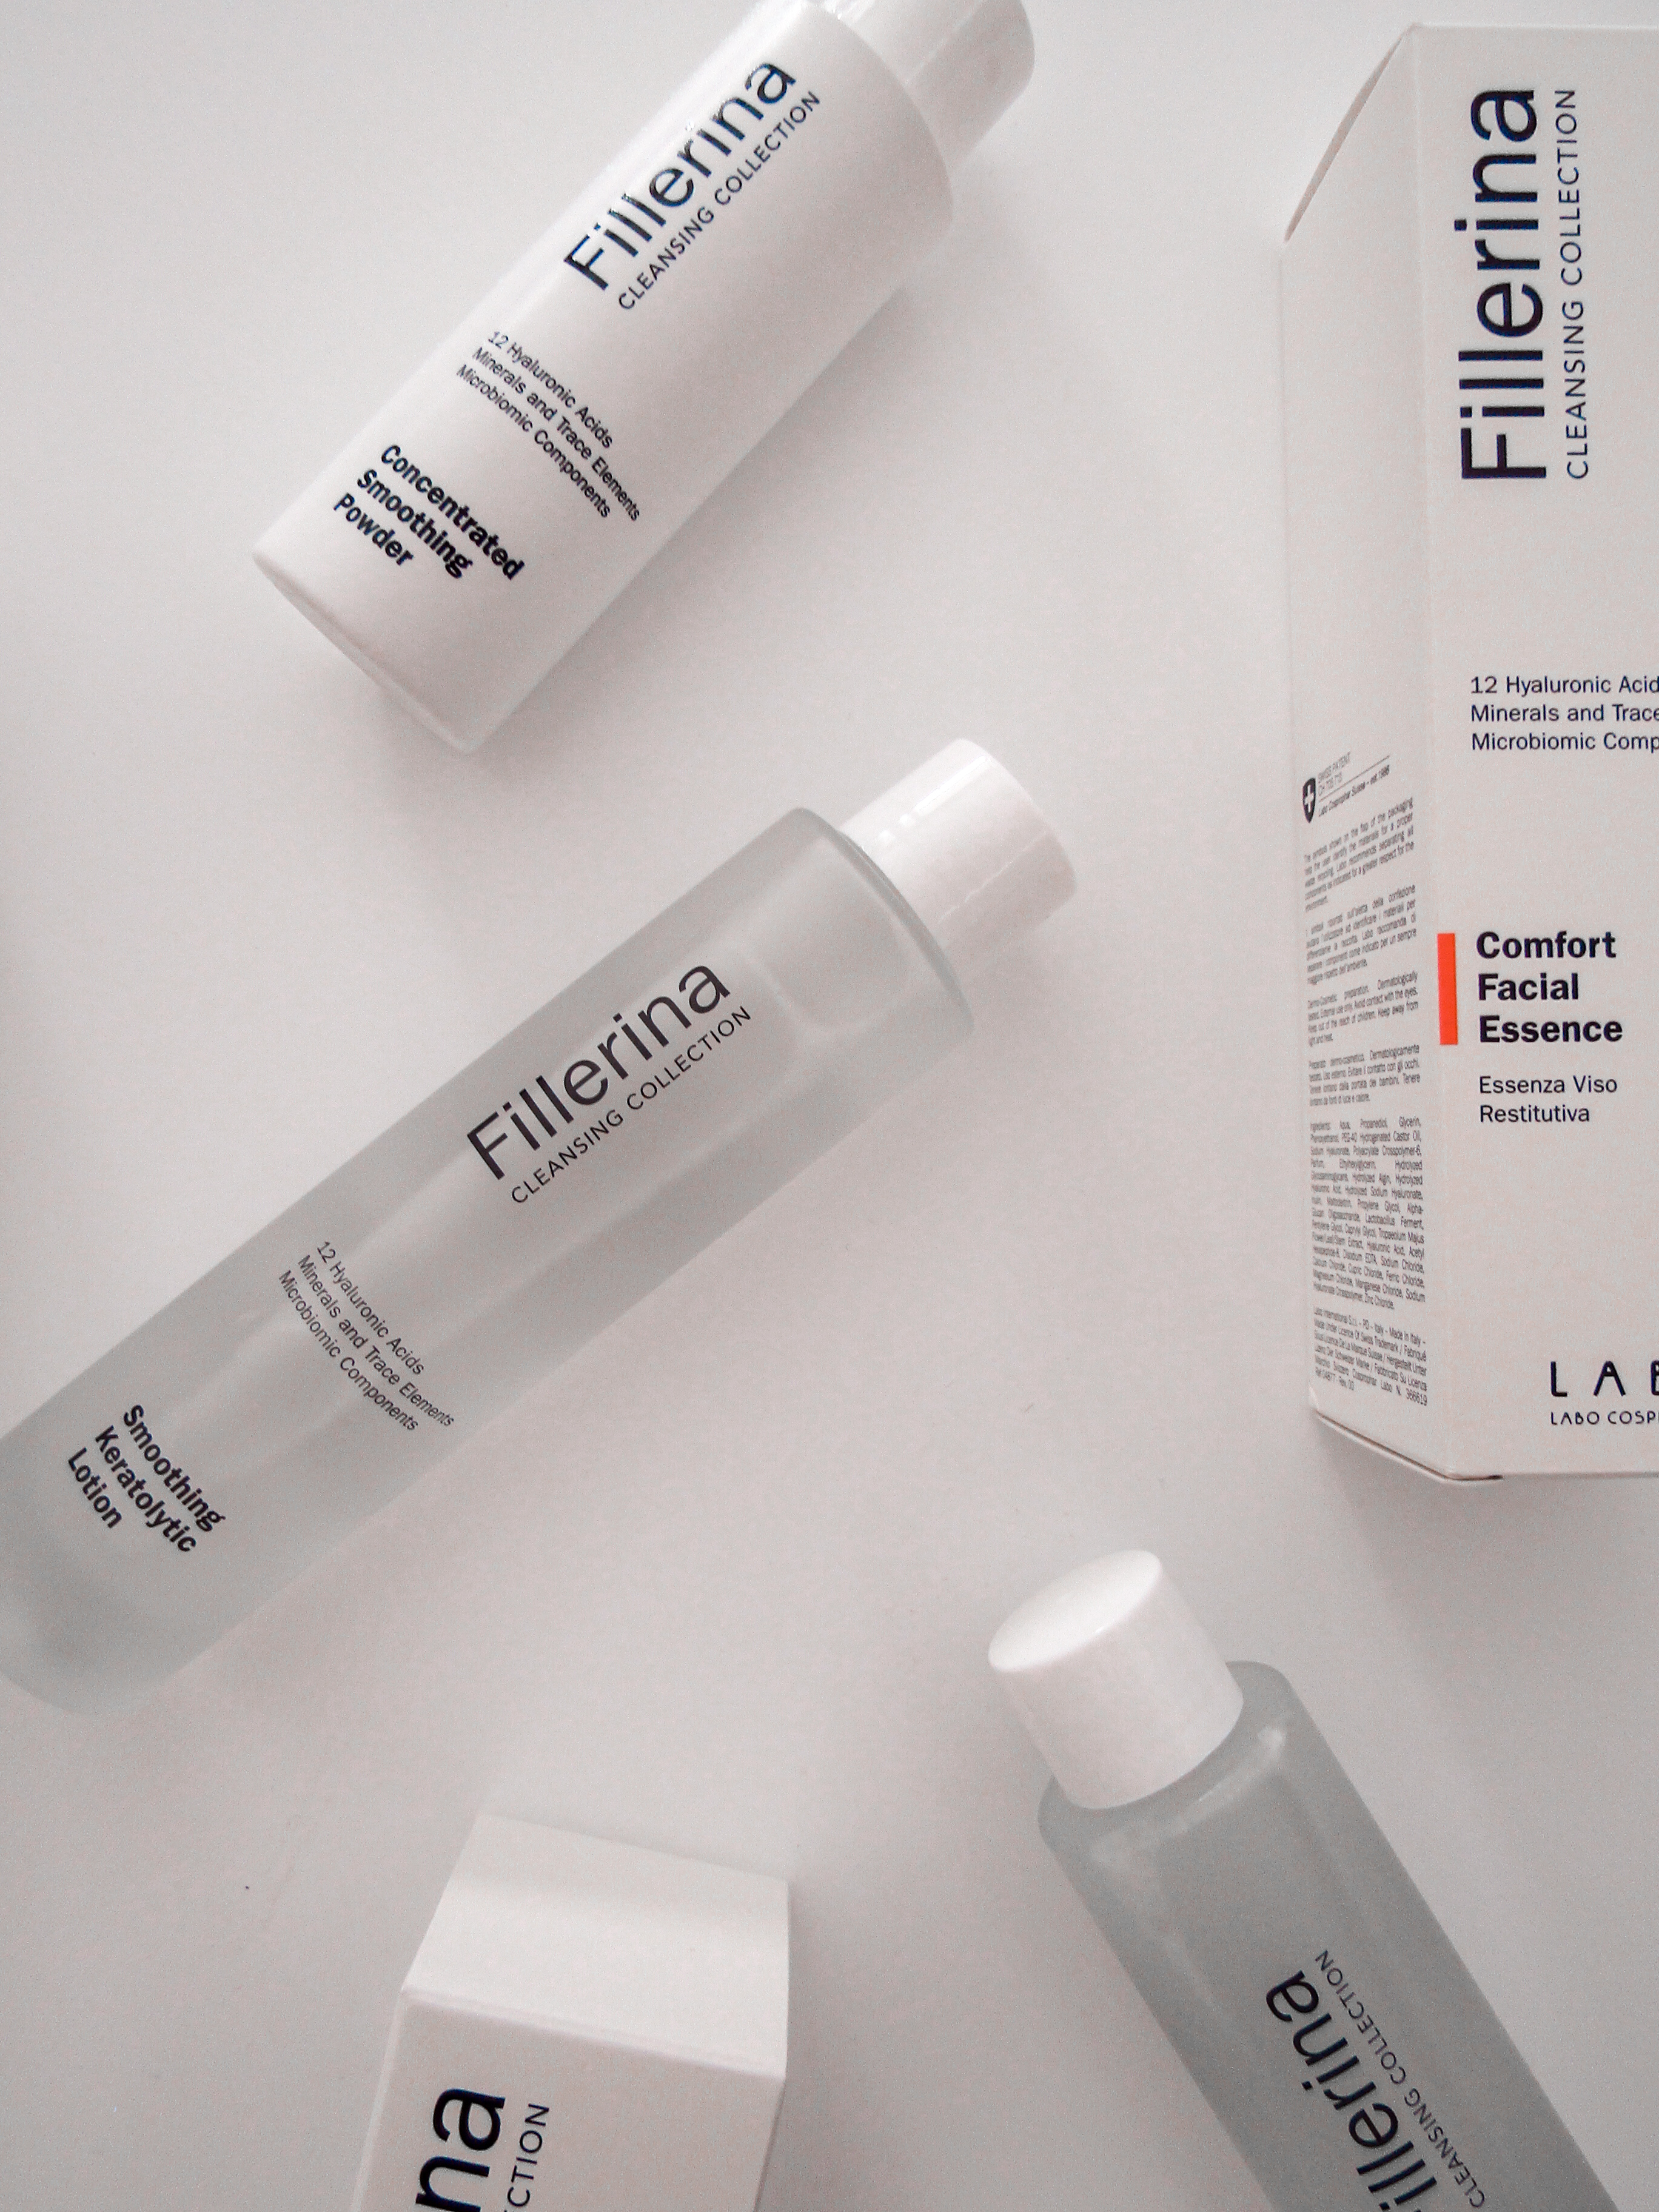 Discover the new Fillerina Cleansing Collection